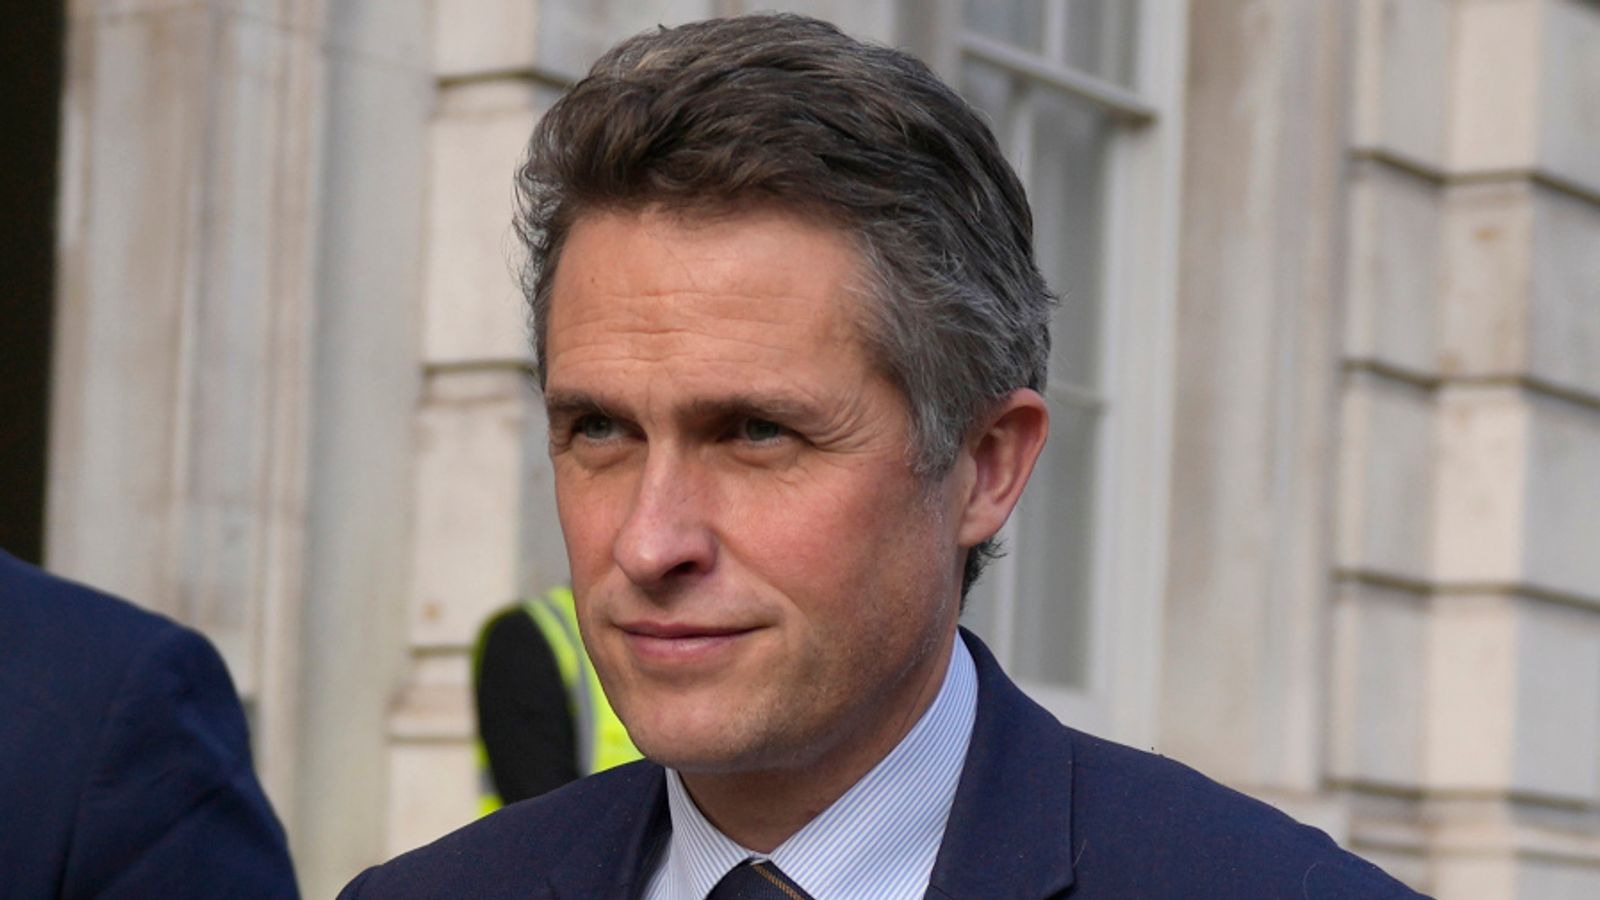 No decision about Sir Gavin Williamson's future until bullying probe ends, says PM